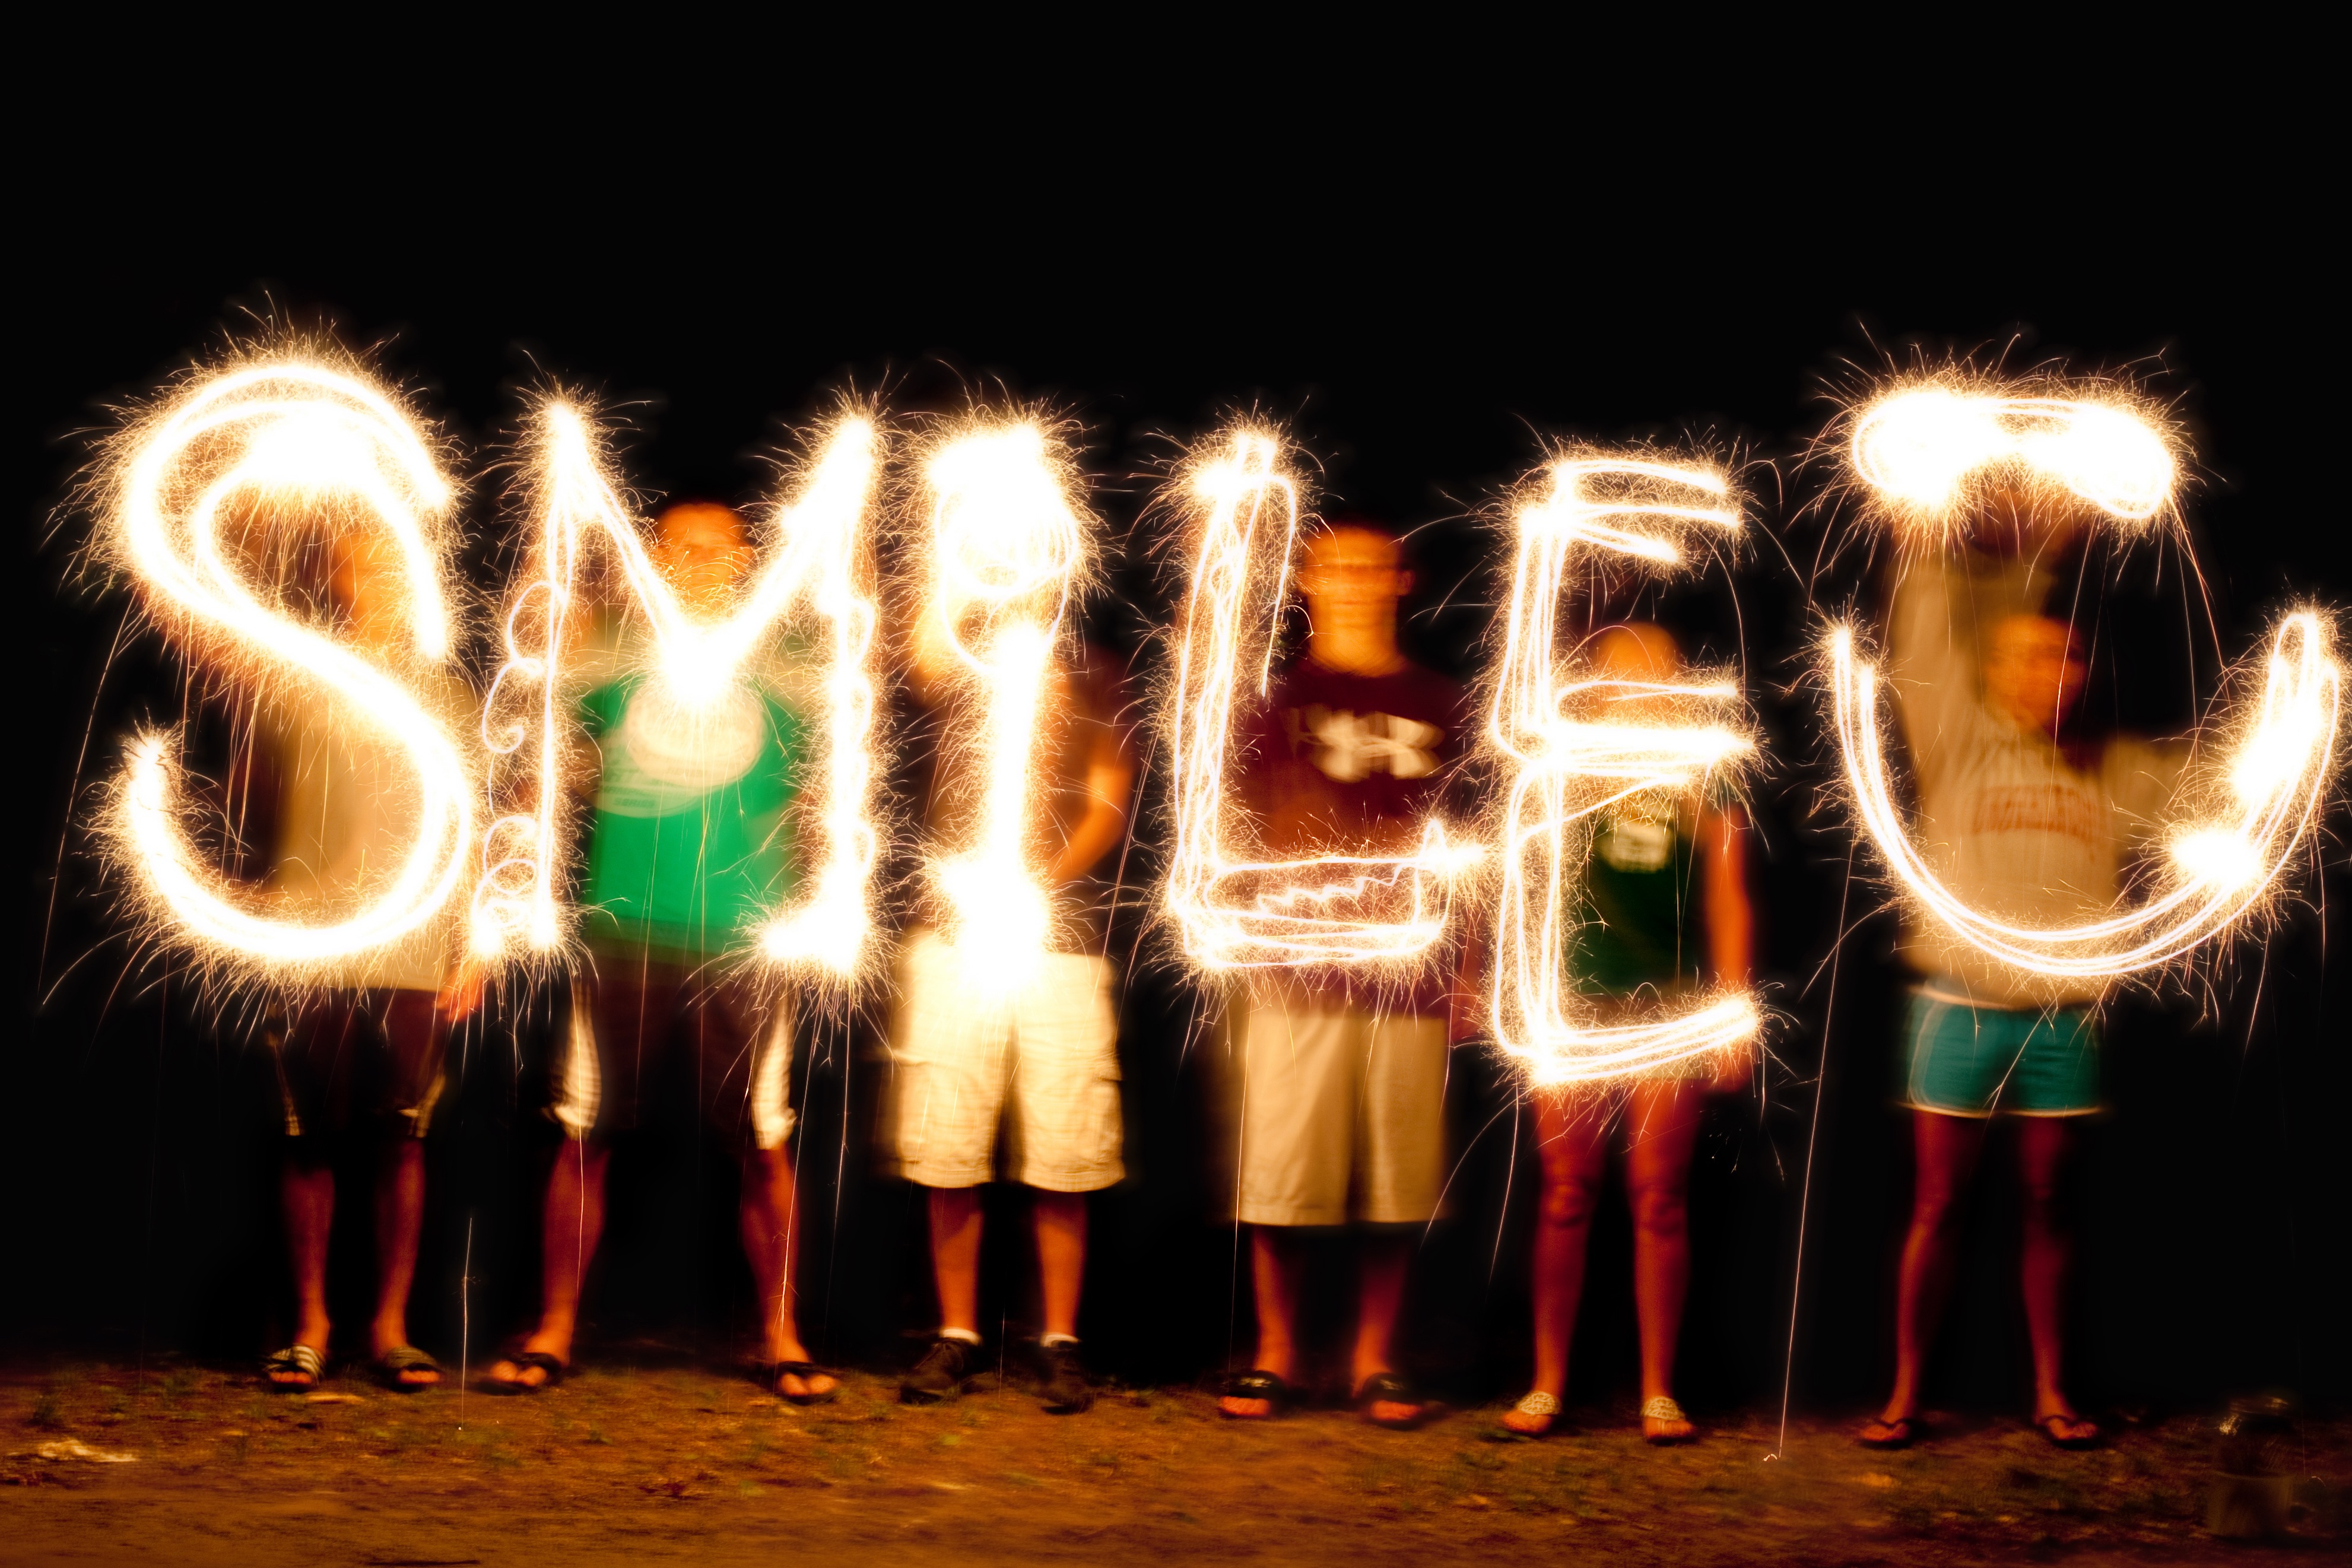 Smile - Light Painting, Activity, Design, Effect, Fireworks, HQ Photo